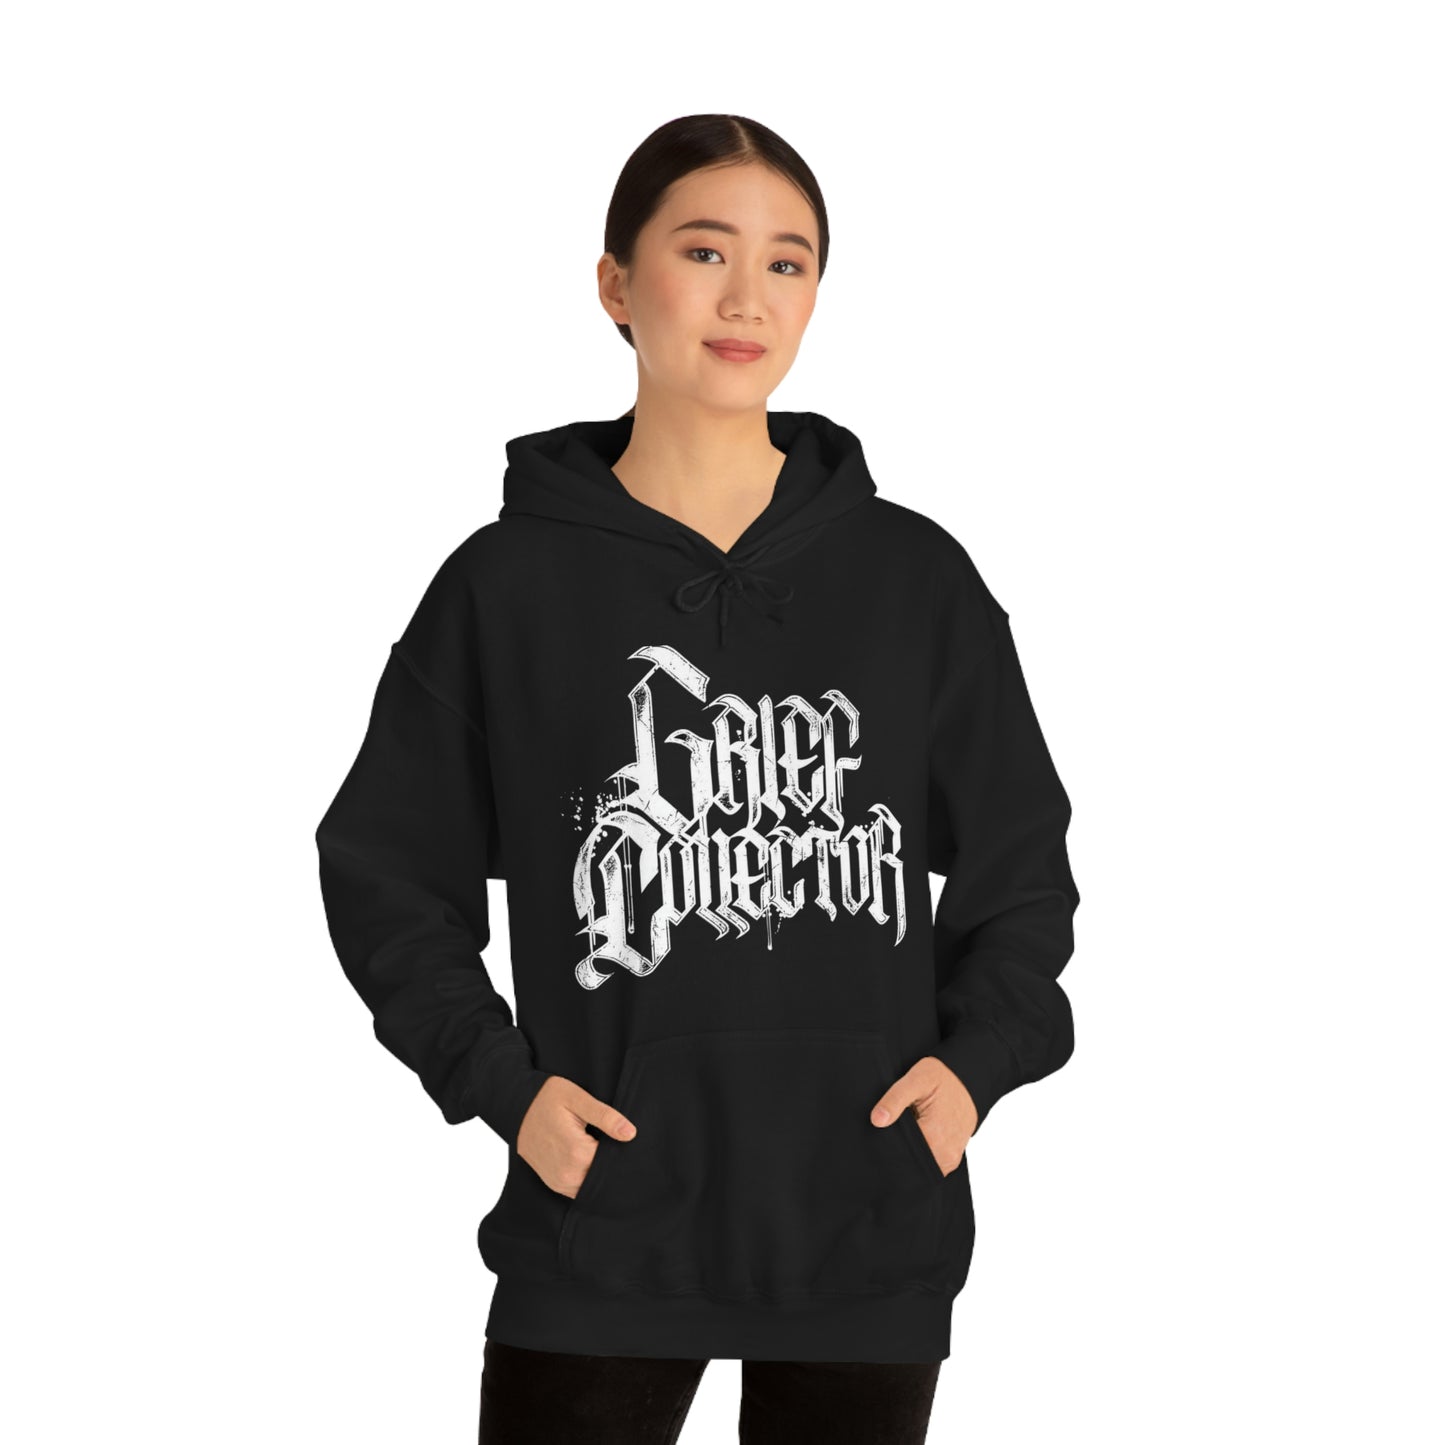 Grief Collector - In Times of Woe Hooded Sweatshirt (Asia)